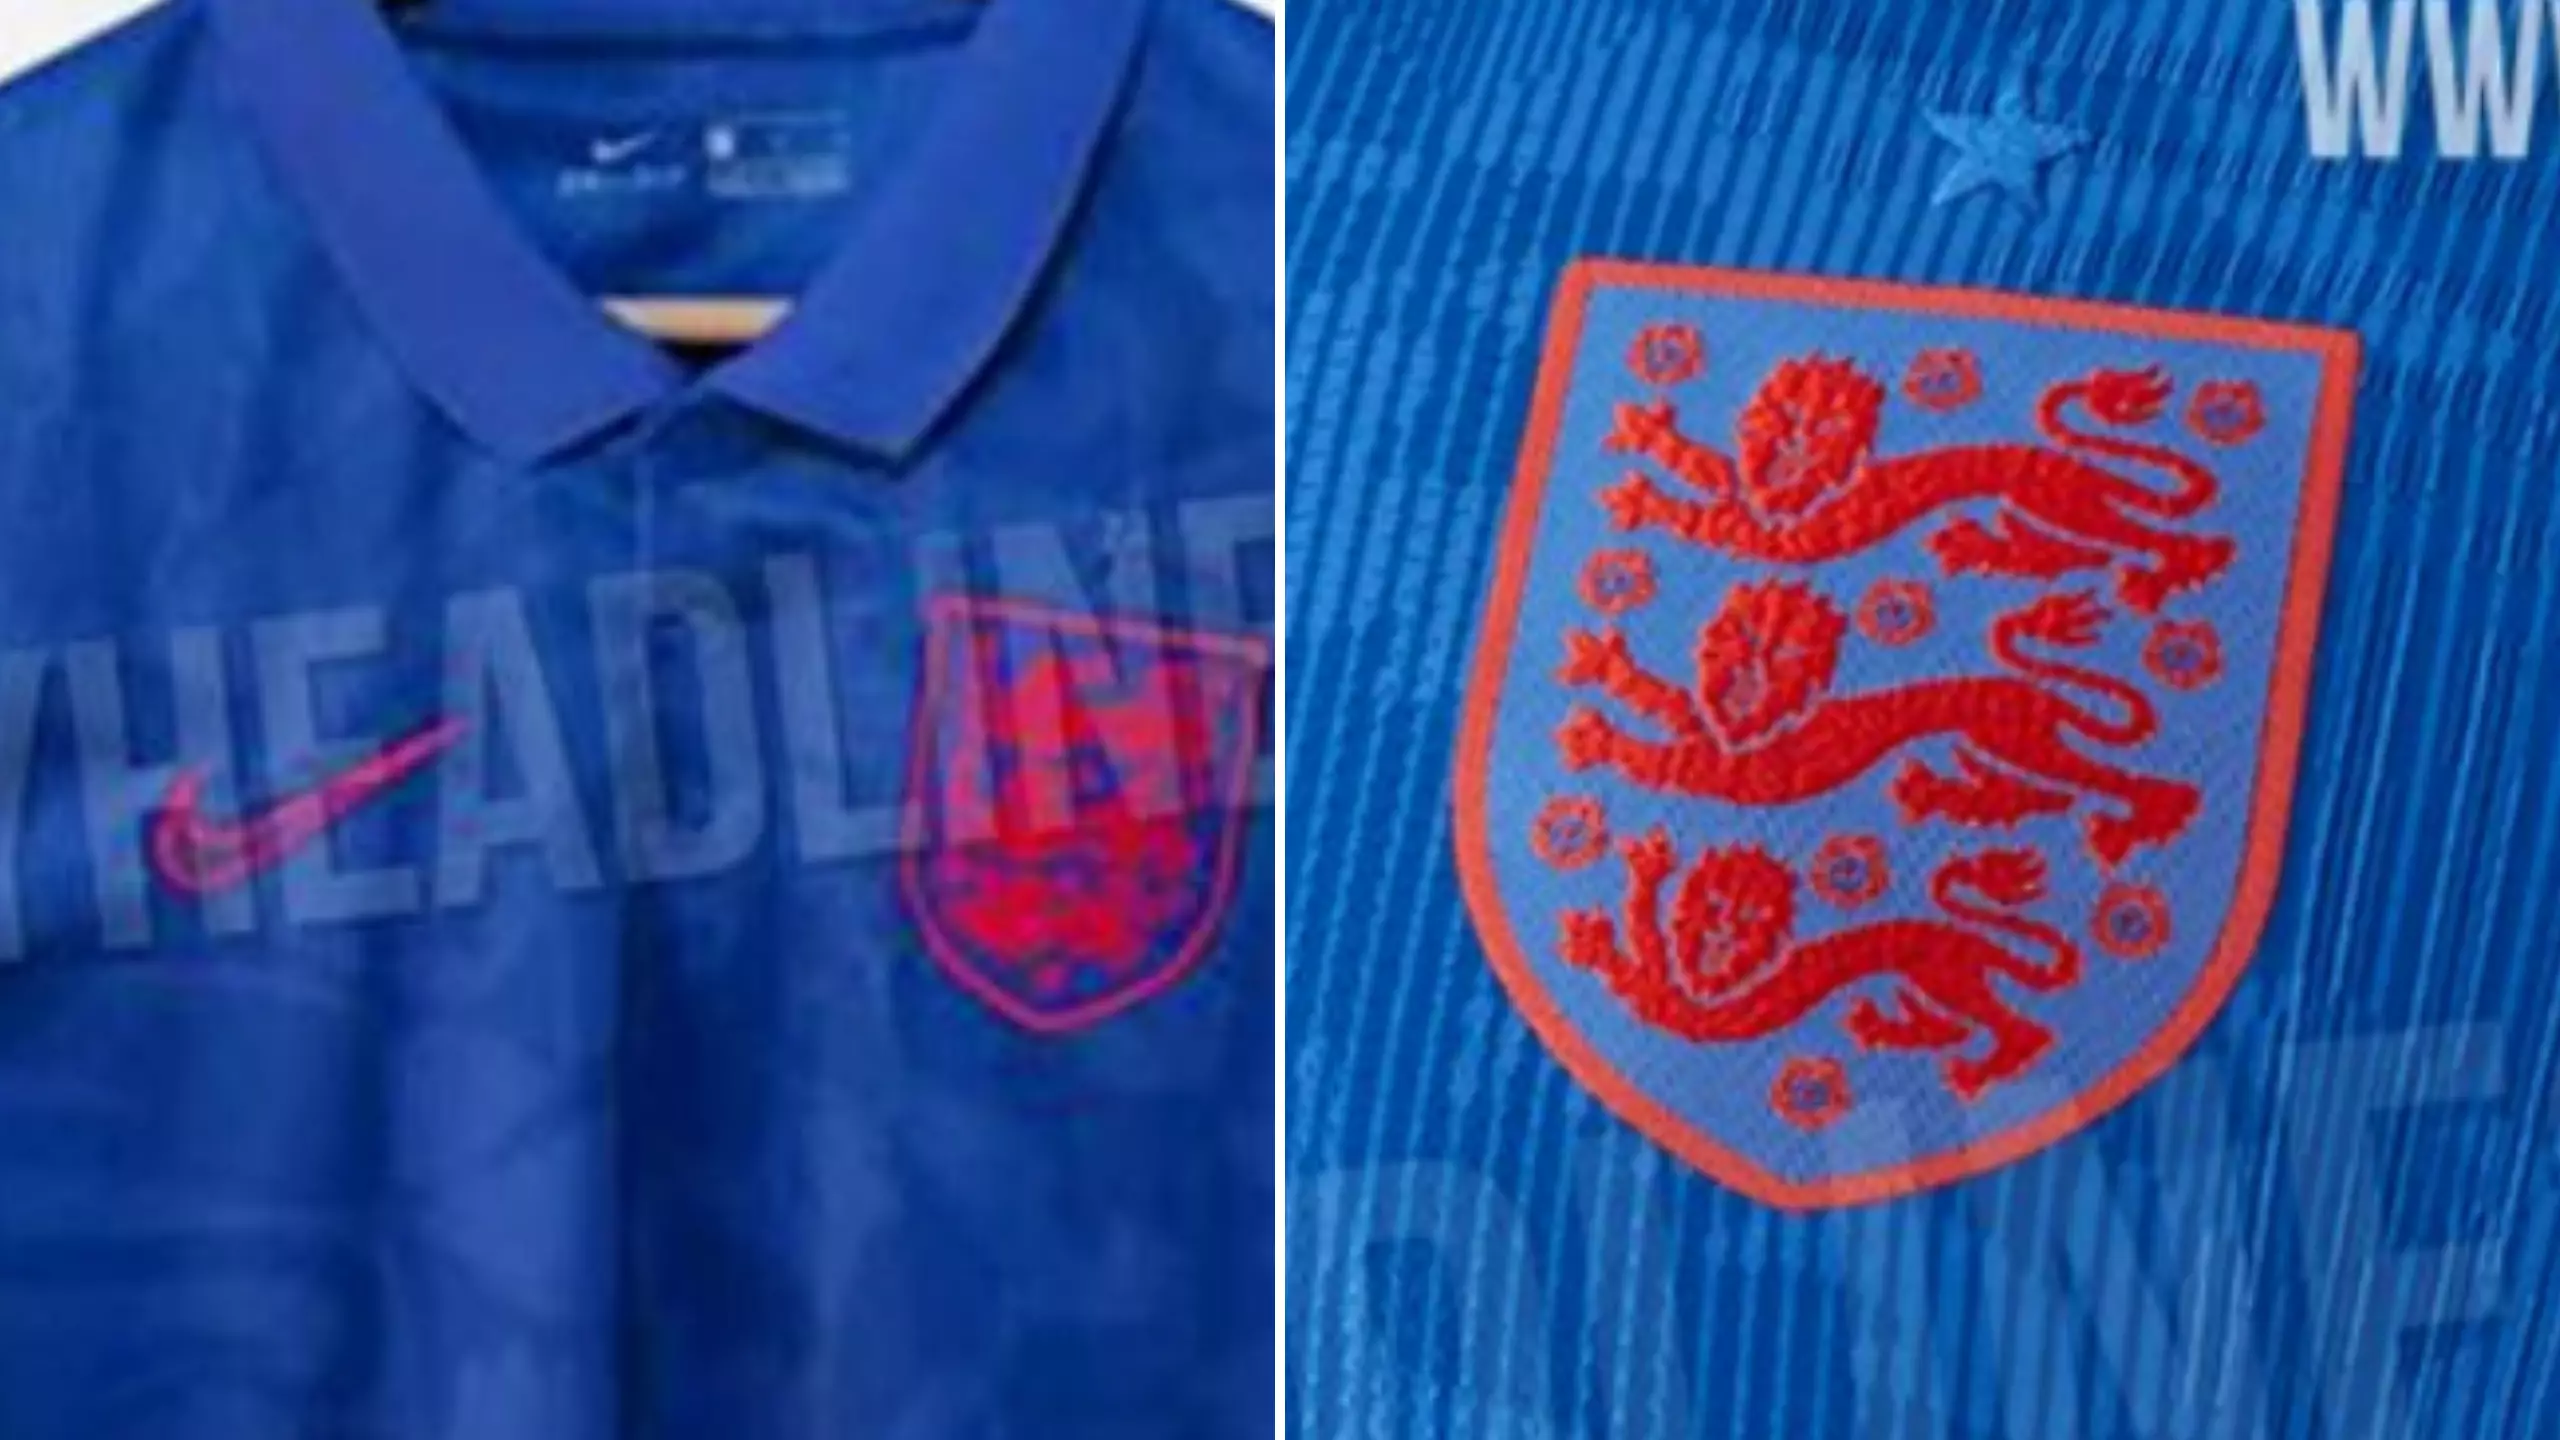 England's New Away Shirt For Euro 2020 Has Been Leaked And It's A Bold Effort